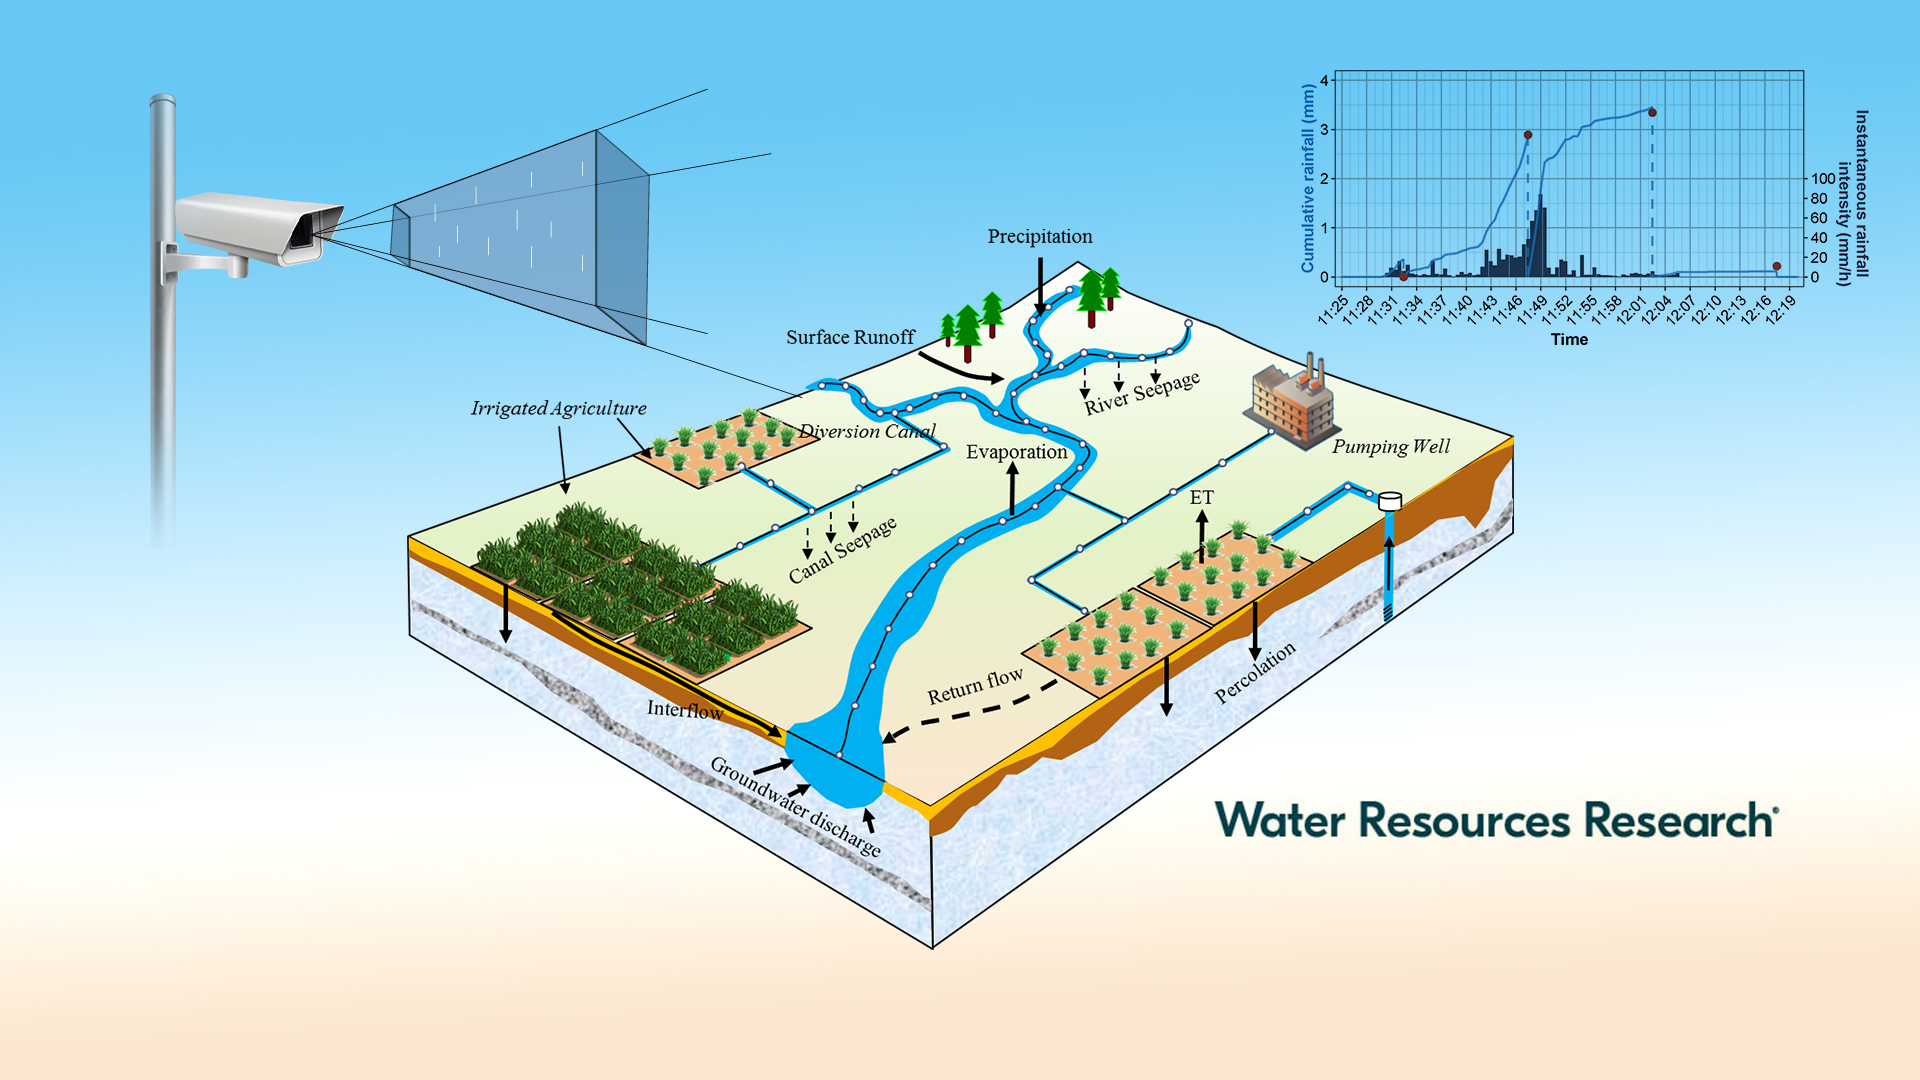 Researchers provide solutions to big data and water management challenges